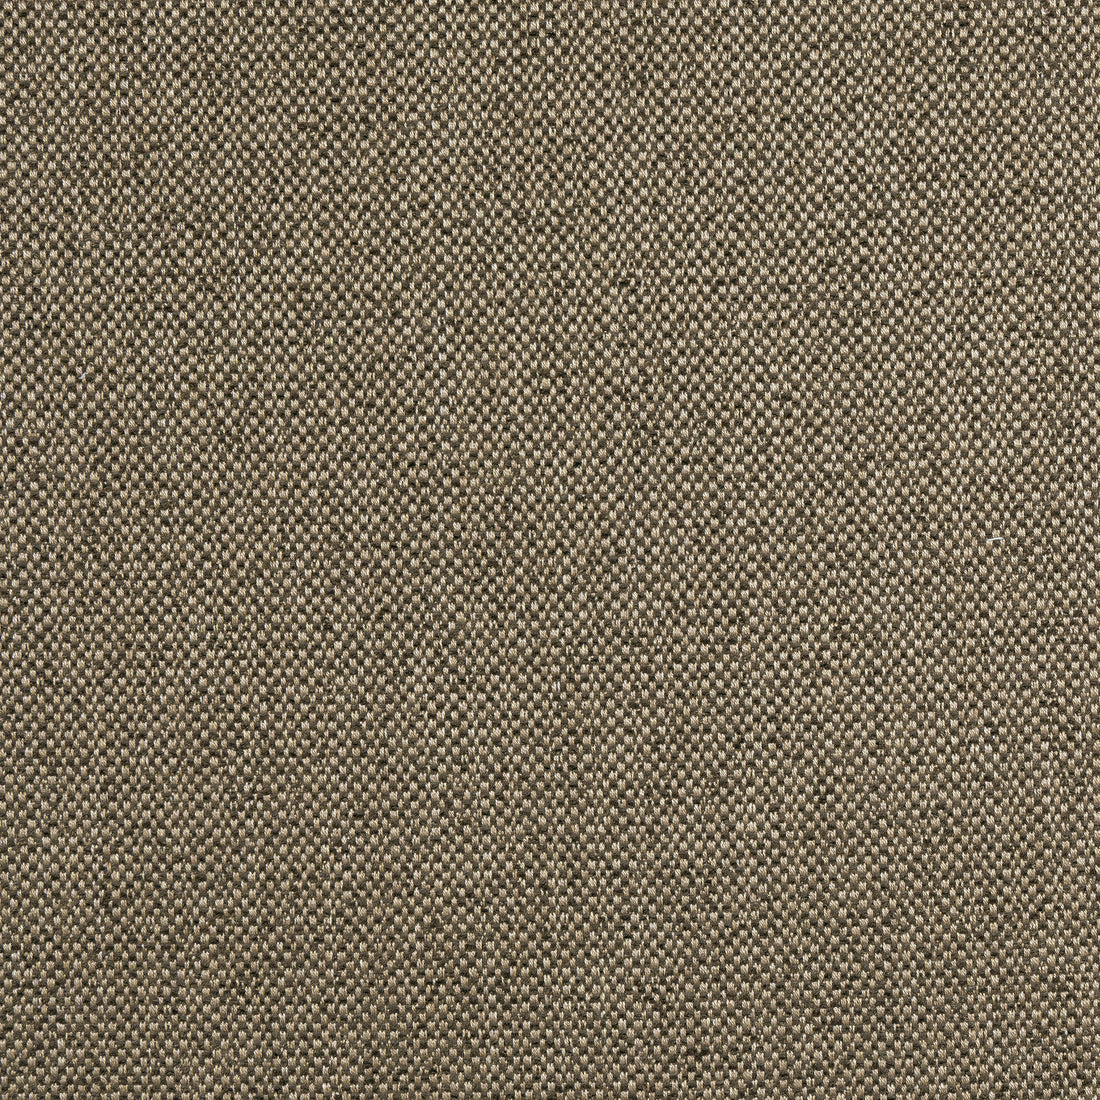 Tinta fabric in mocha color - pattern number W8129 - by Thibaut in the Sereno collection